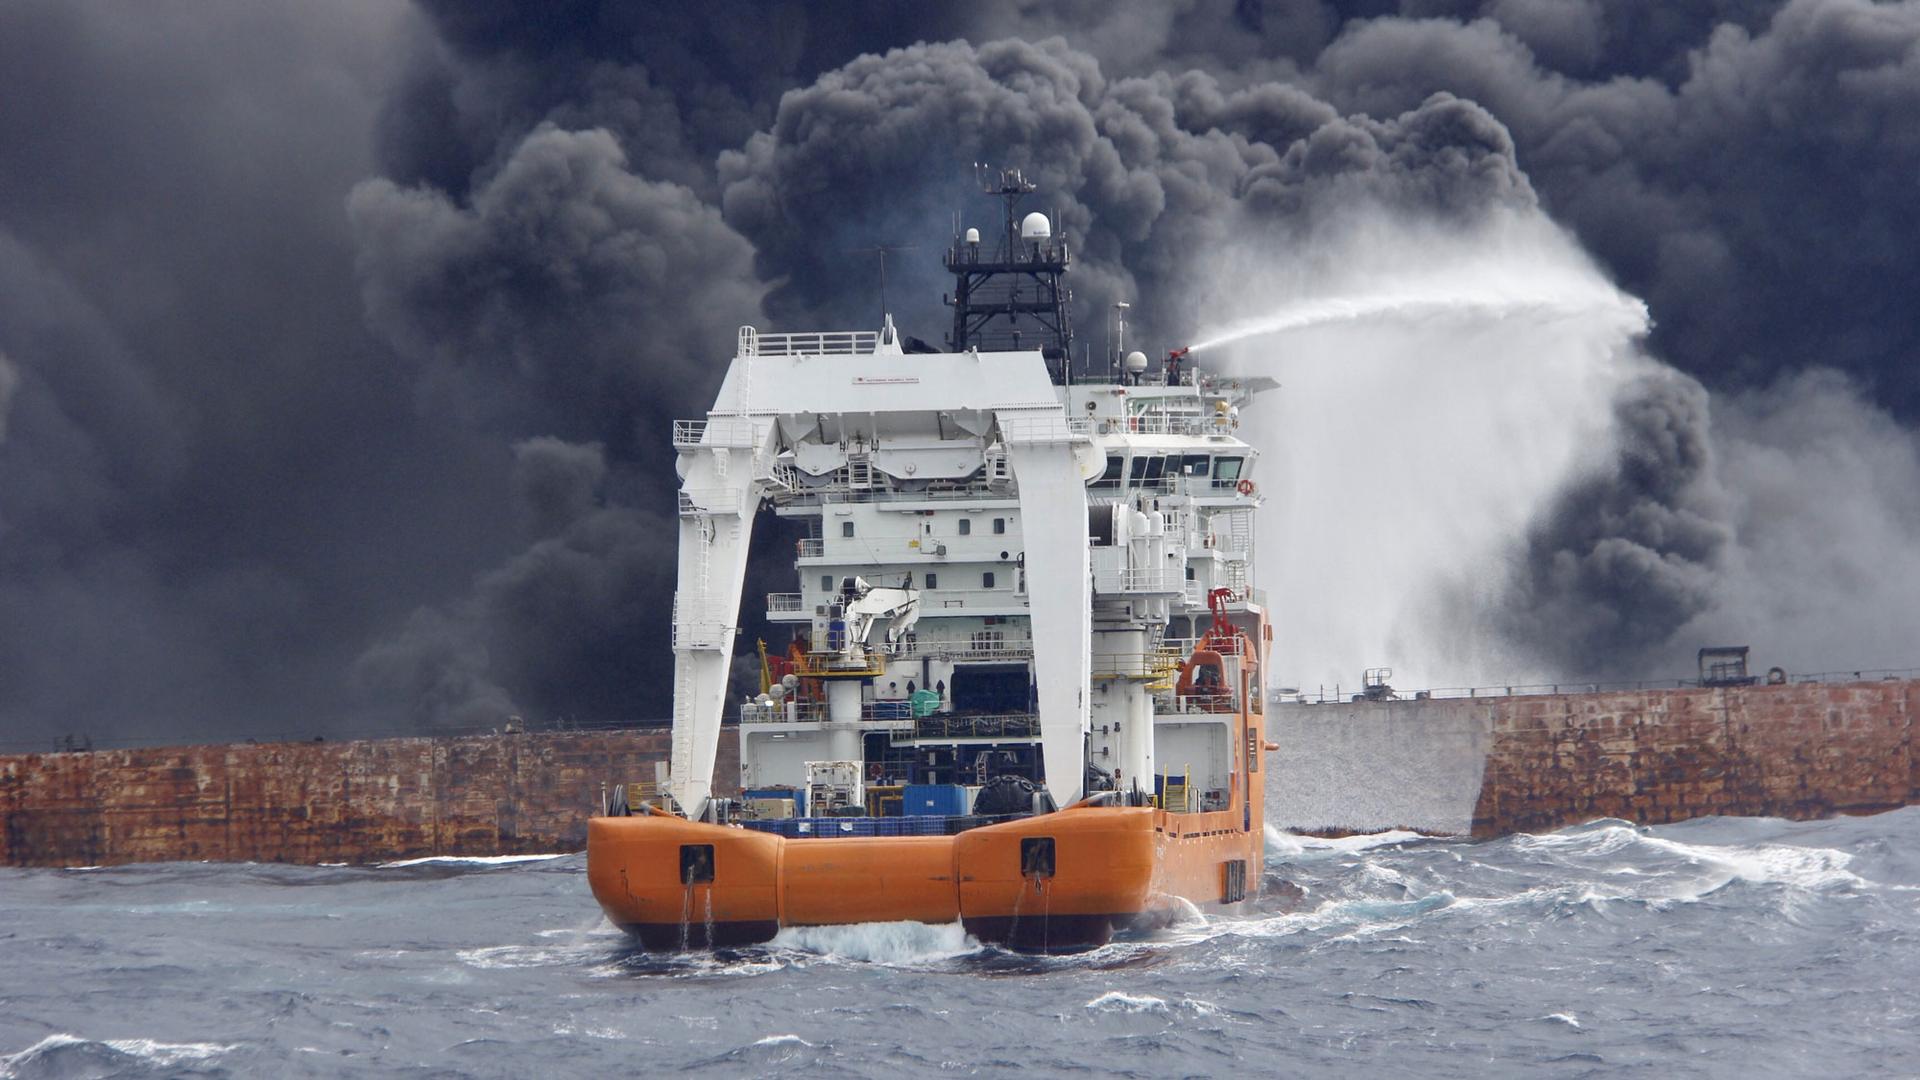 A smaller boat shoots a jet of water out a dark, billowing clouds of smoke coming from a brown metal tanker ship